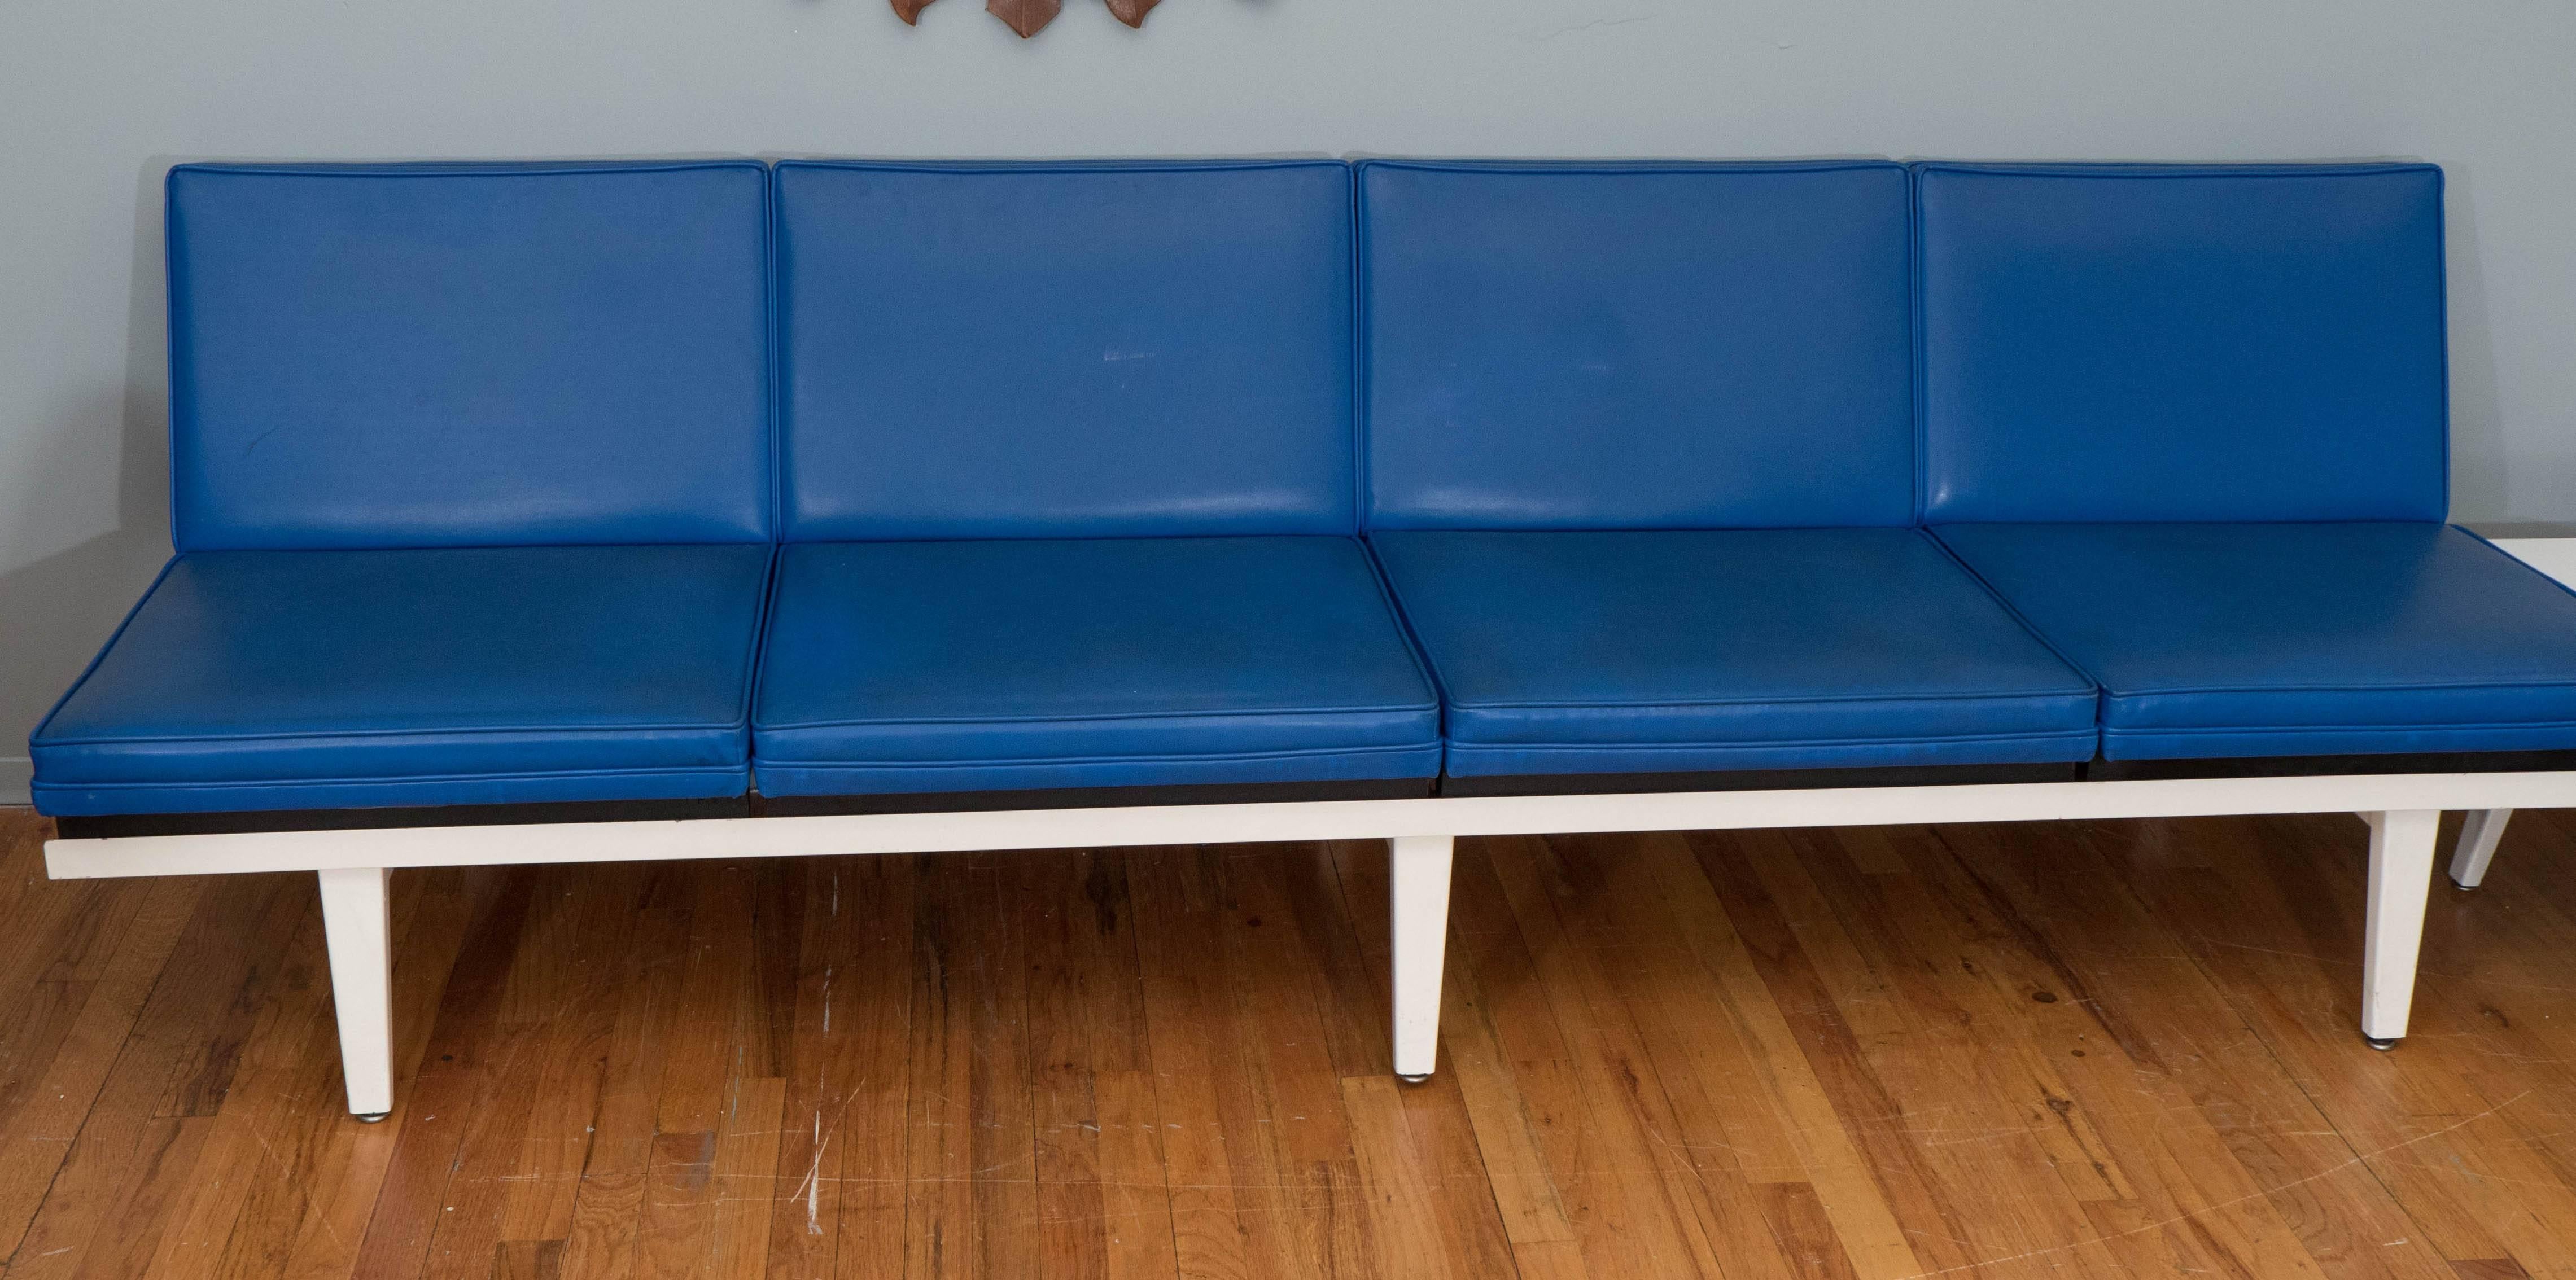 A 1960s sectional living room set by designer George Nelson for Herman Miller, which includes a four seat sofa and two seat bench, upholstered in blue vinyl cushions, against a white enameled metal frame, with attached side table. Very good vintage